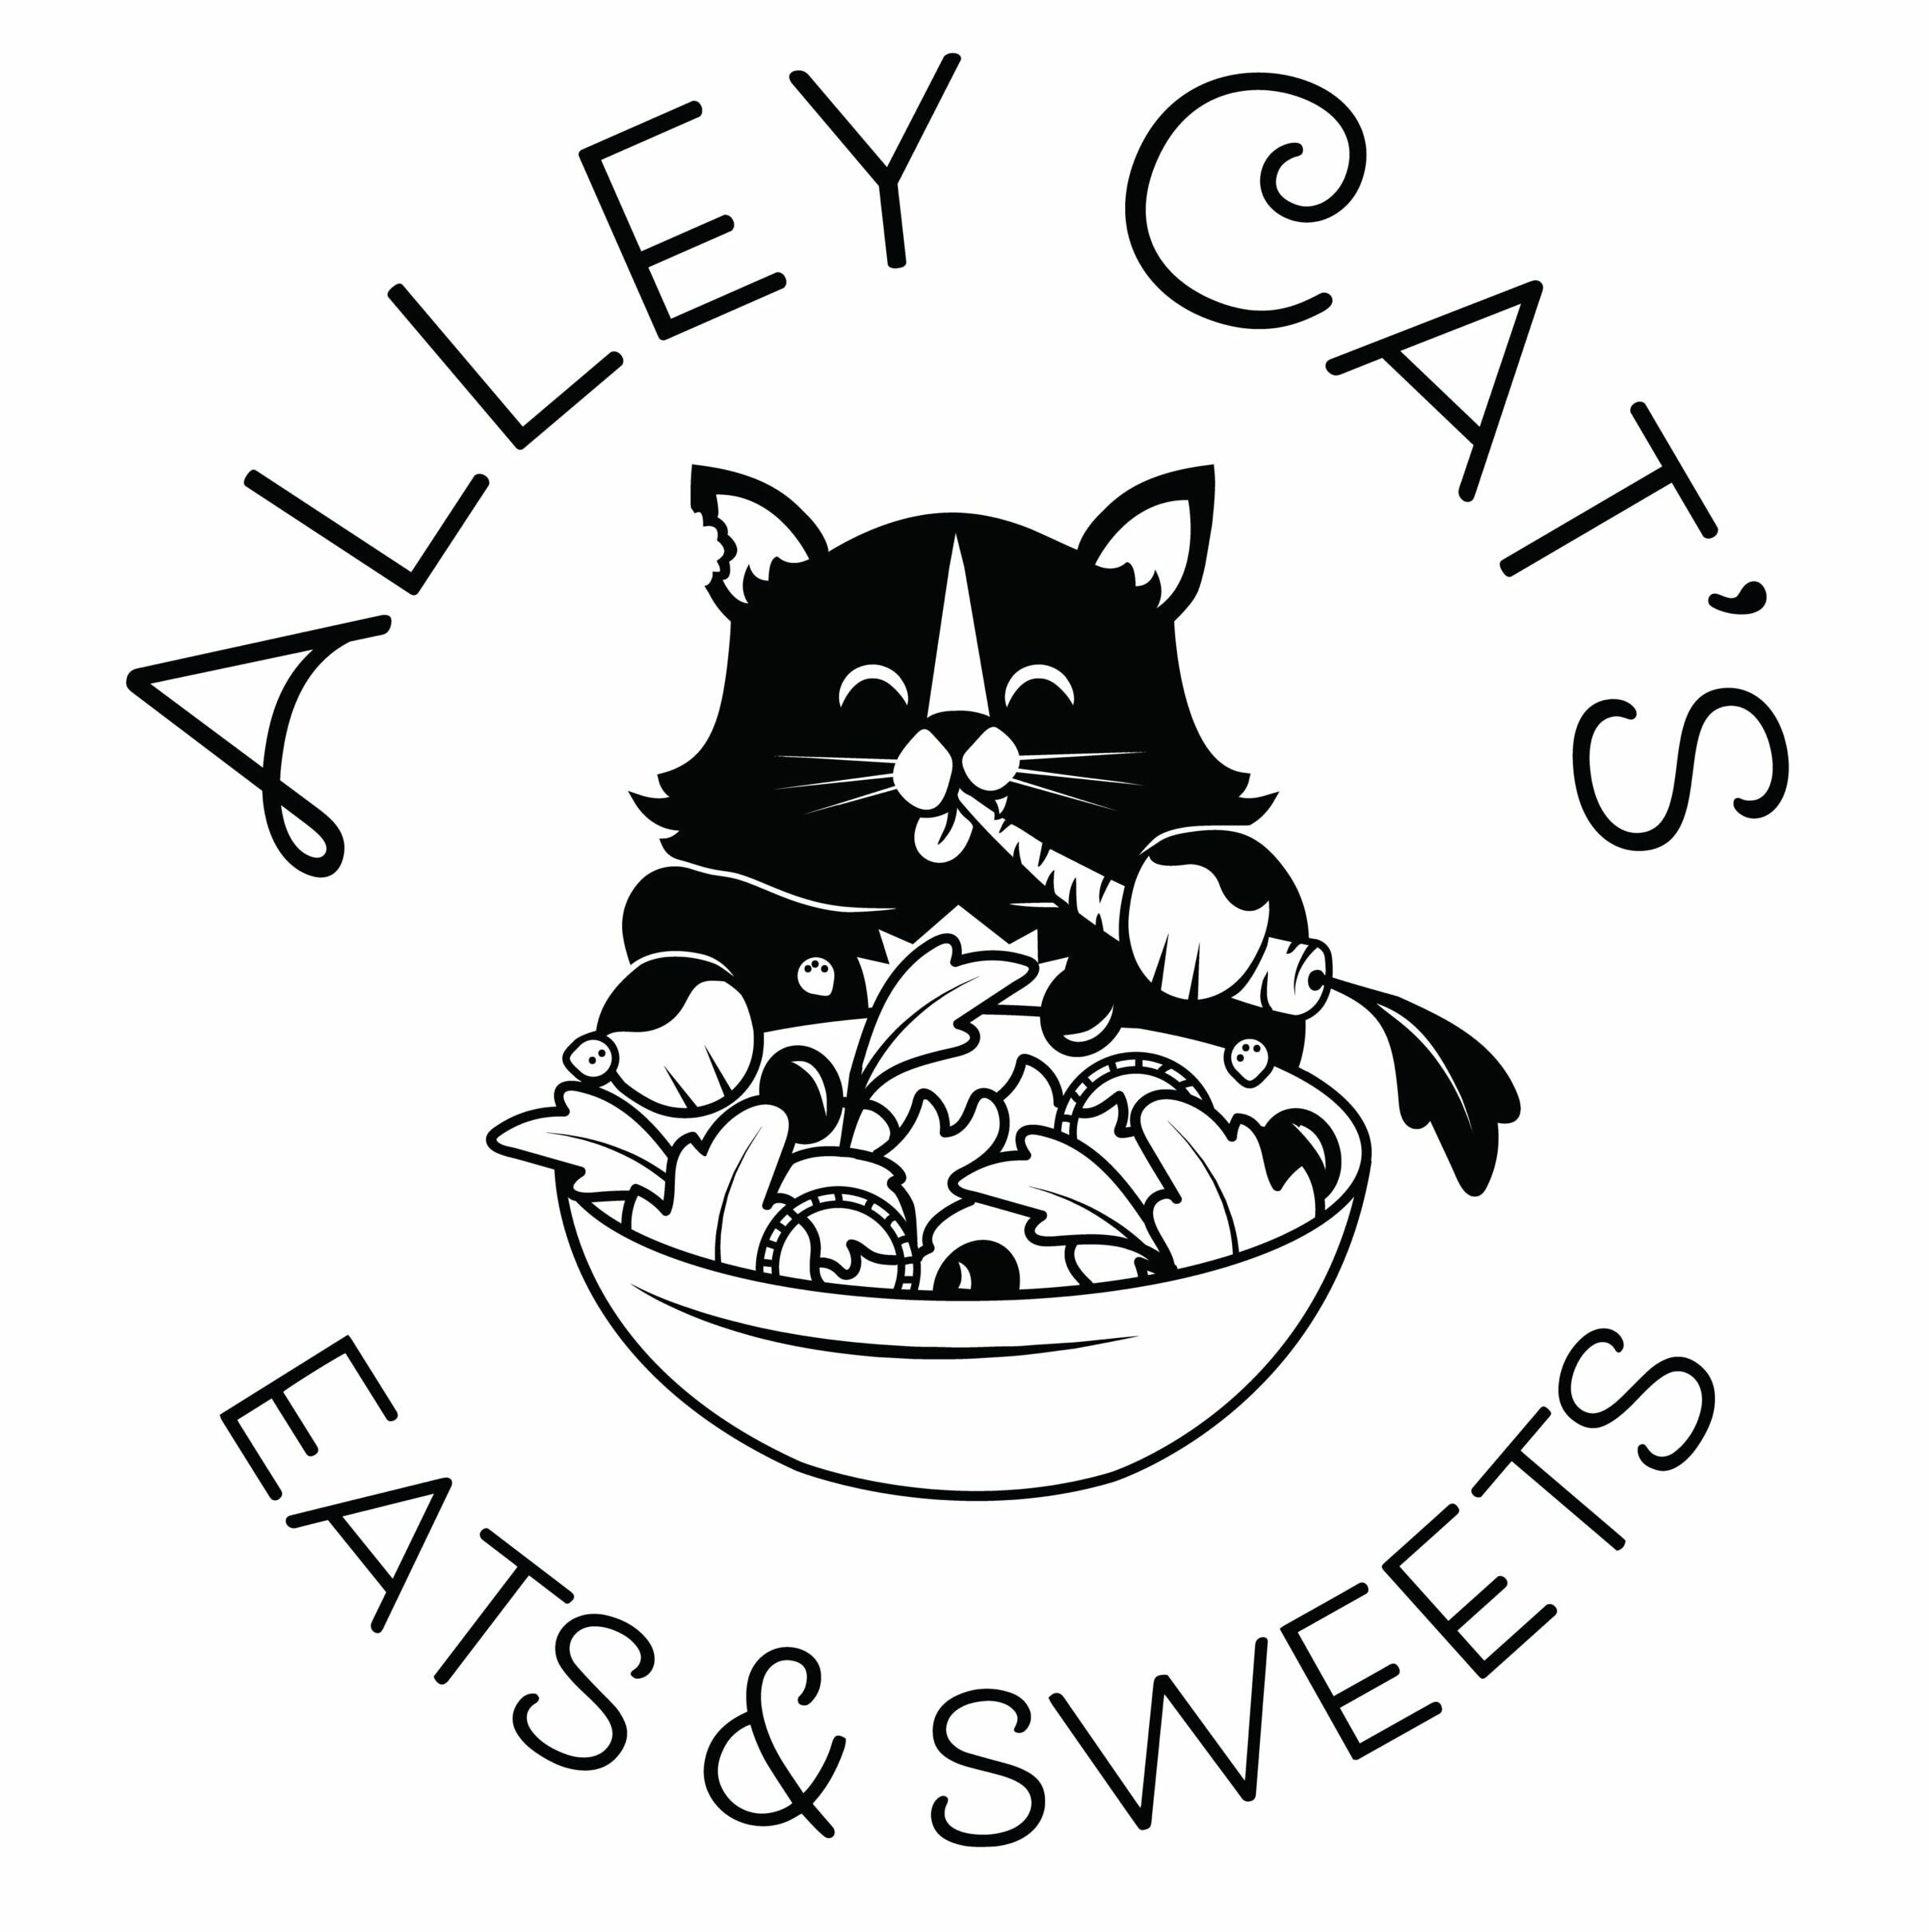 Alley Cat's Eats and Sweets